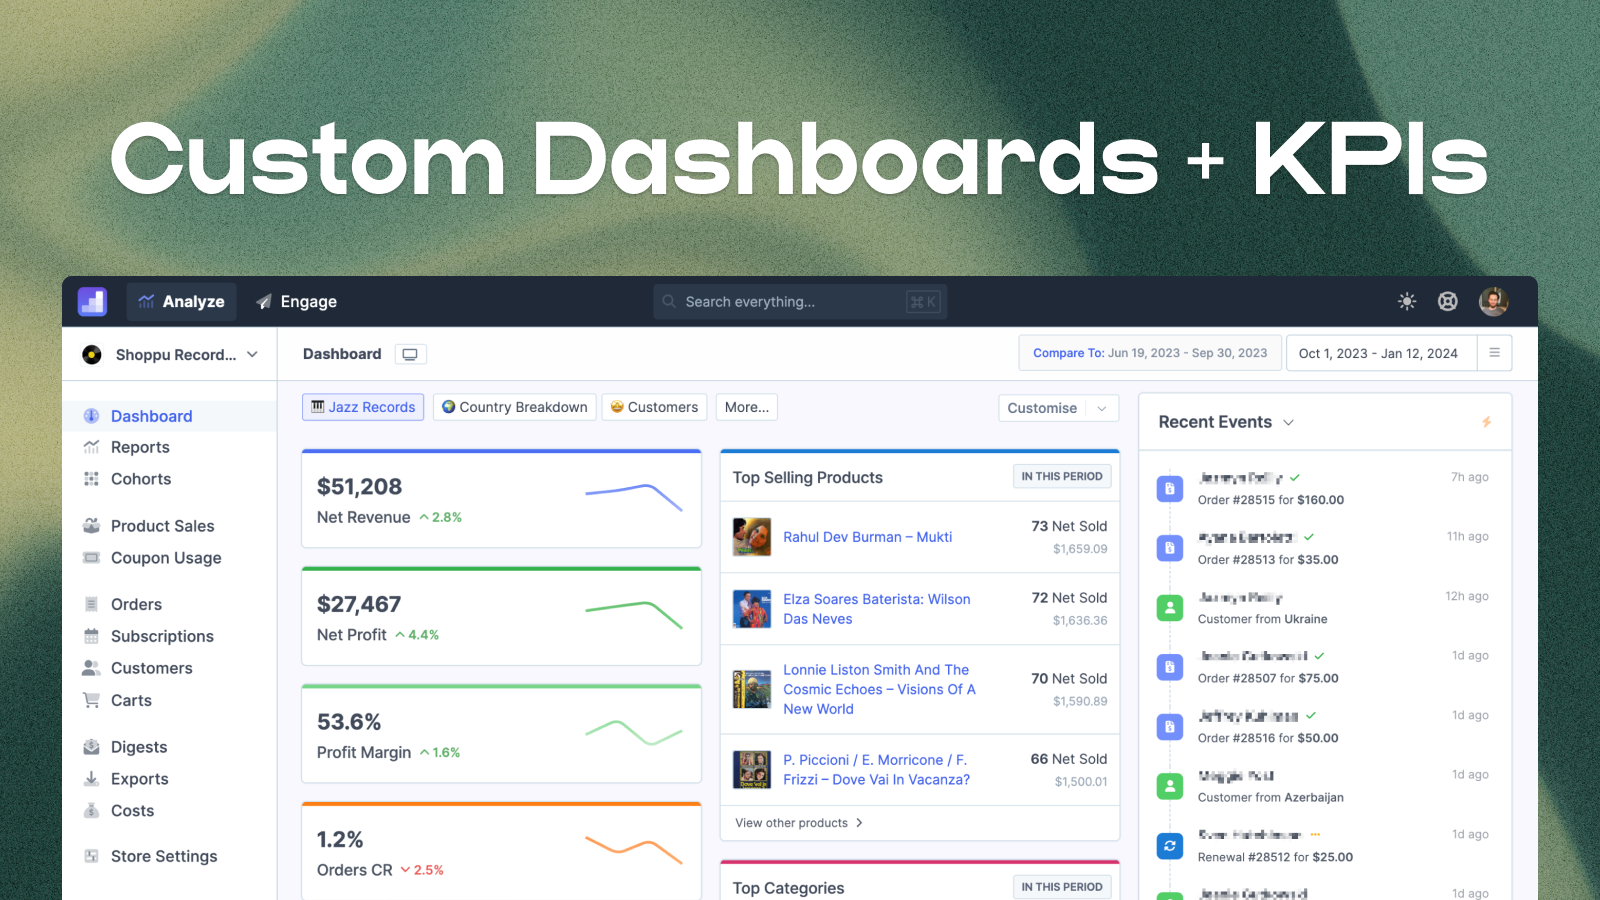 Customisable dashboard and reports